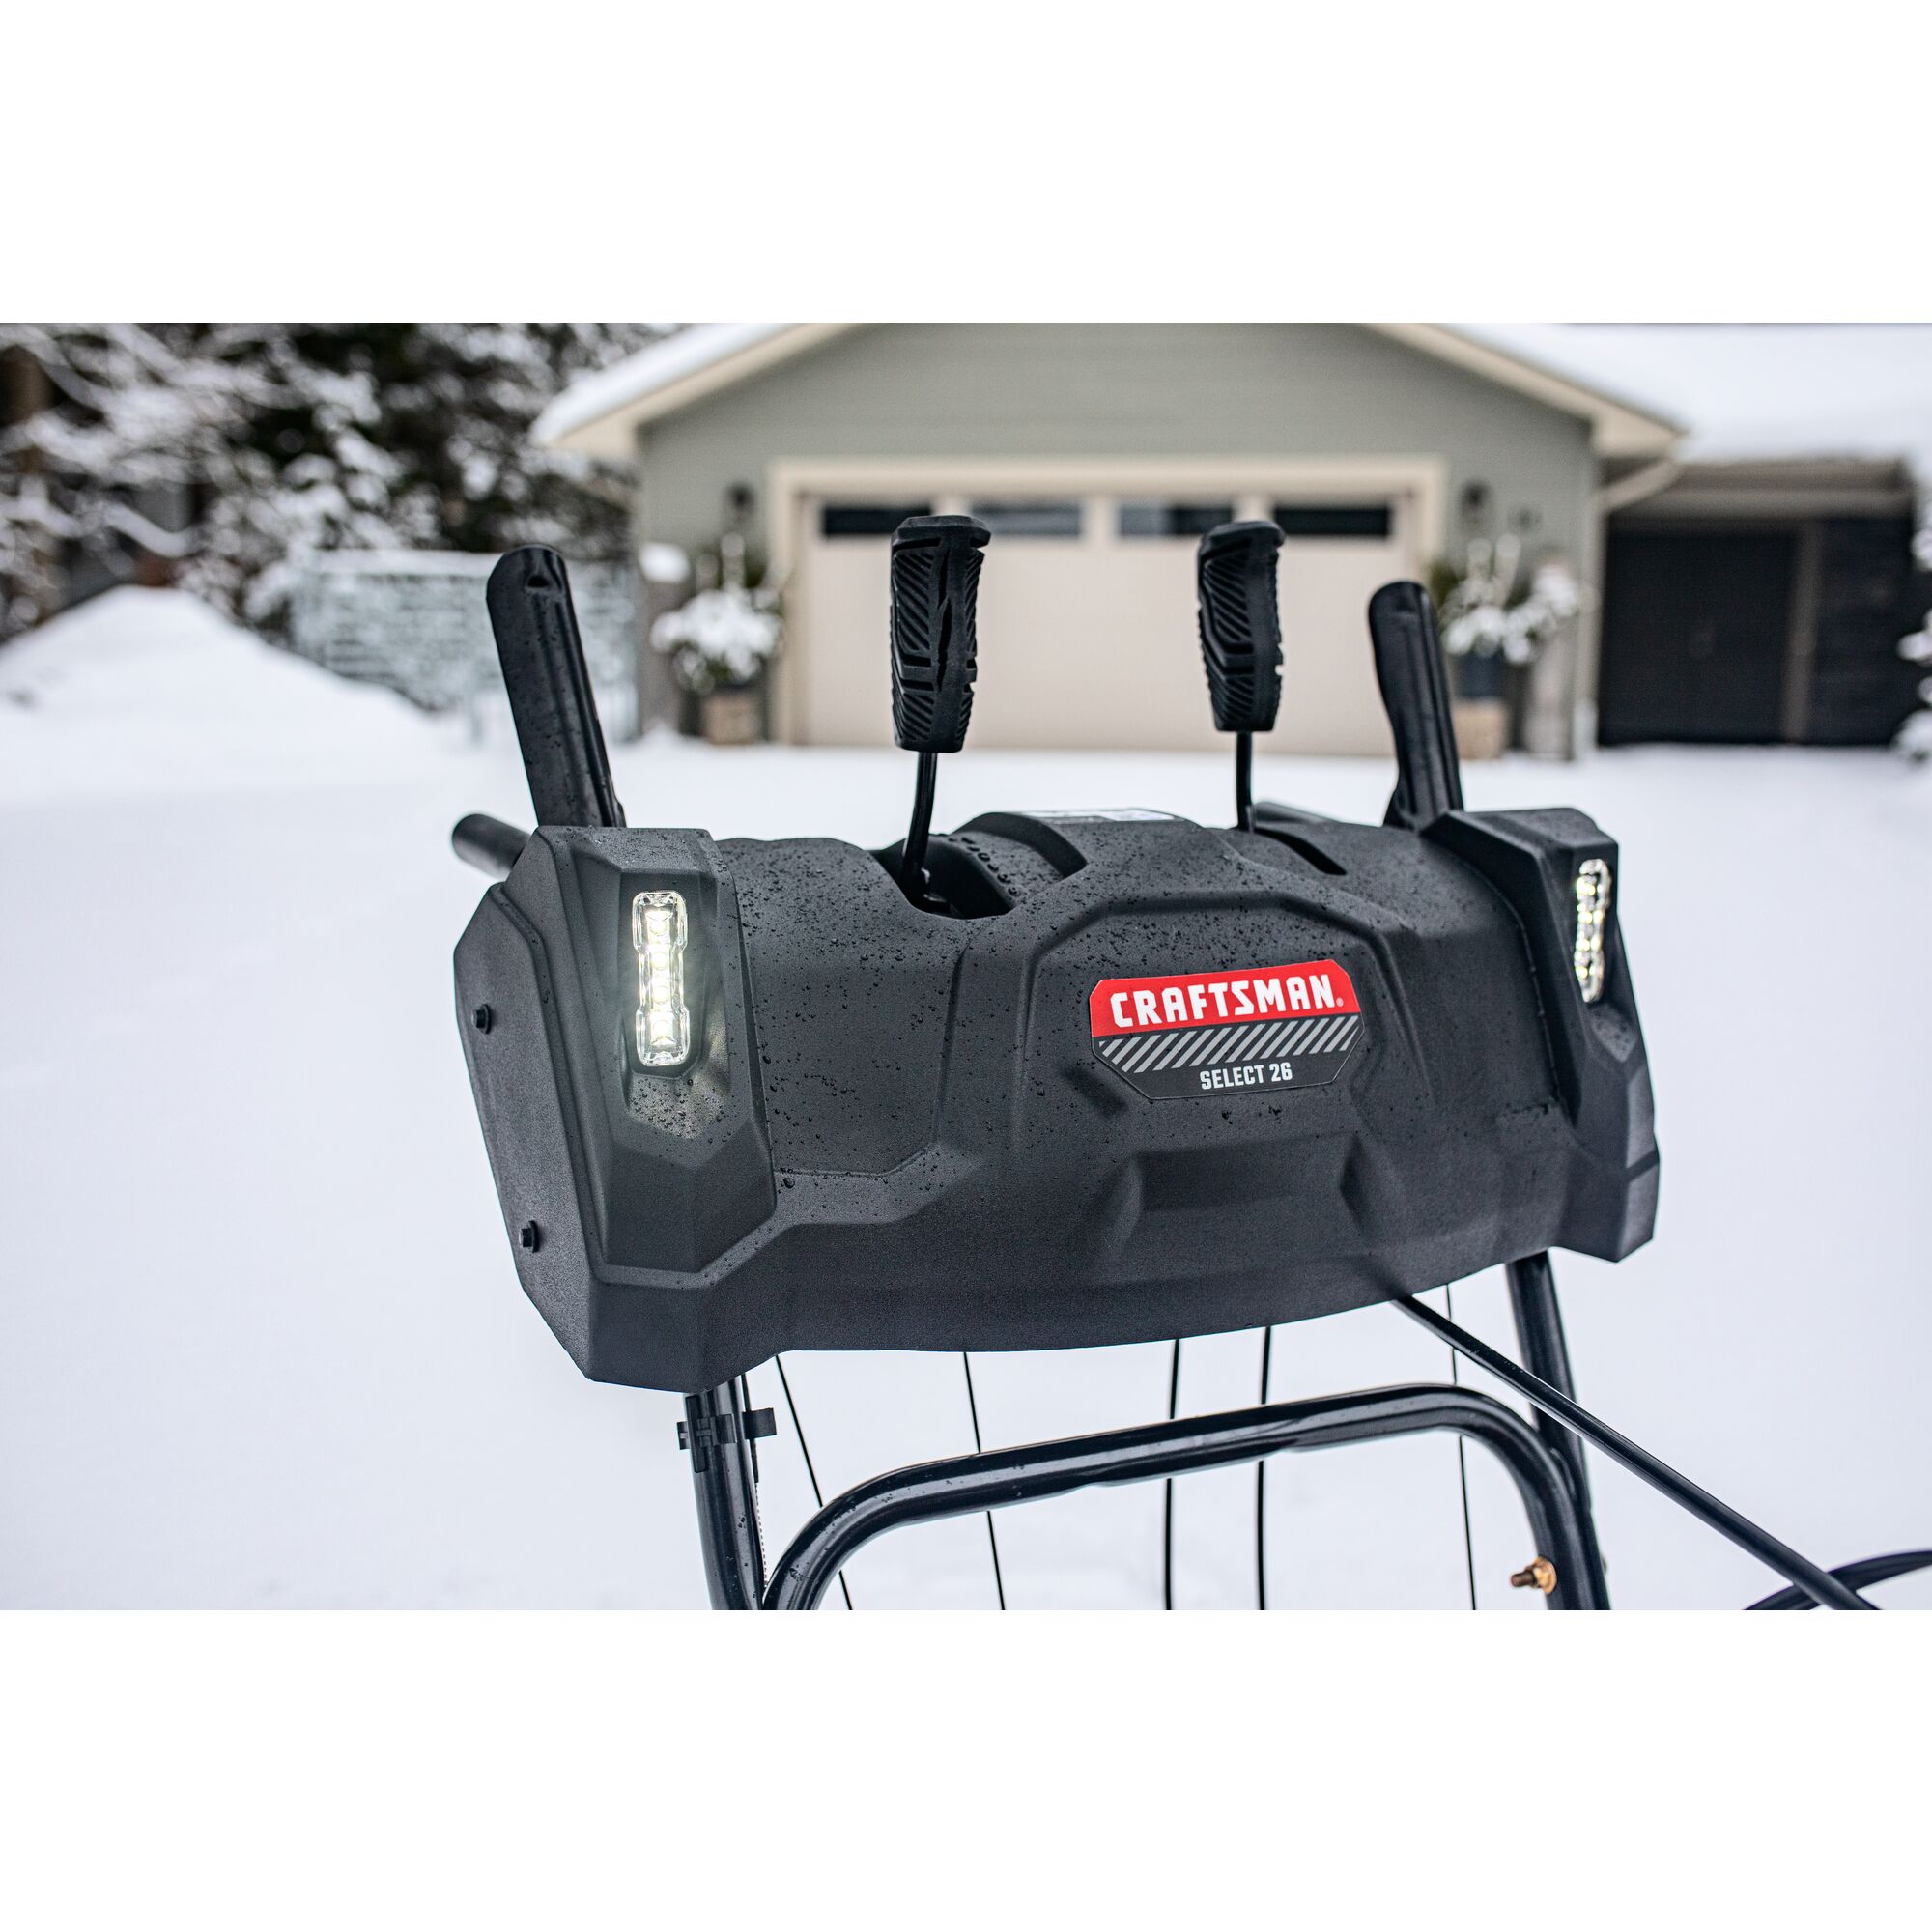 CRAFTSMAN Select 26 Snowblower zoomed in view of handles and LED headlights